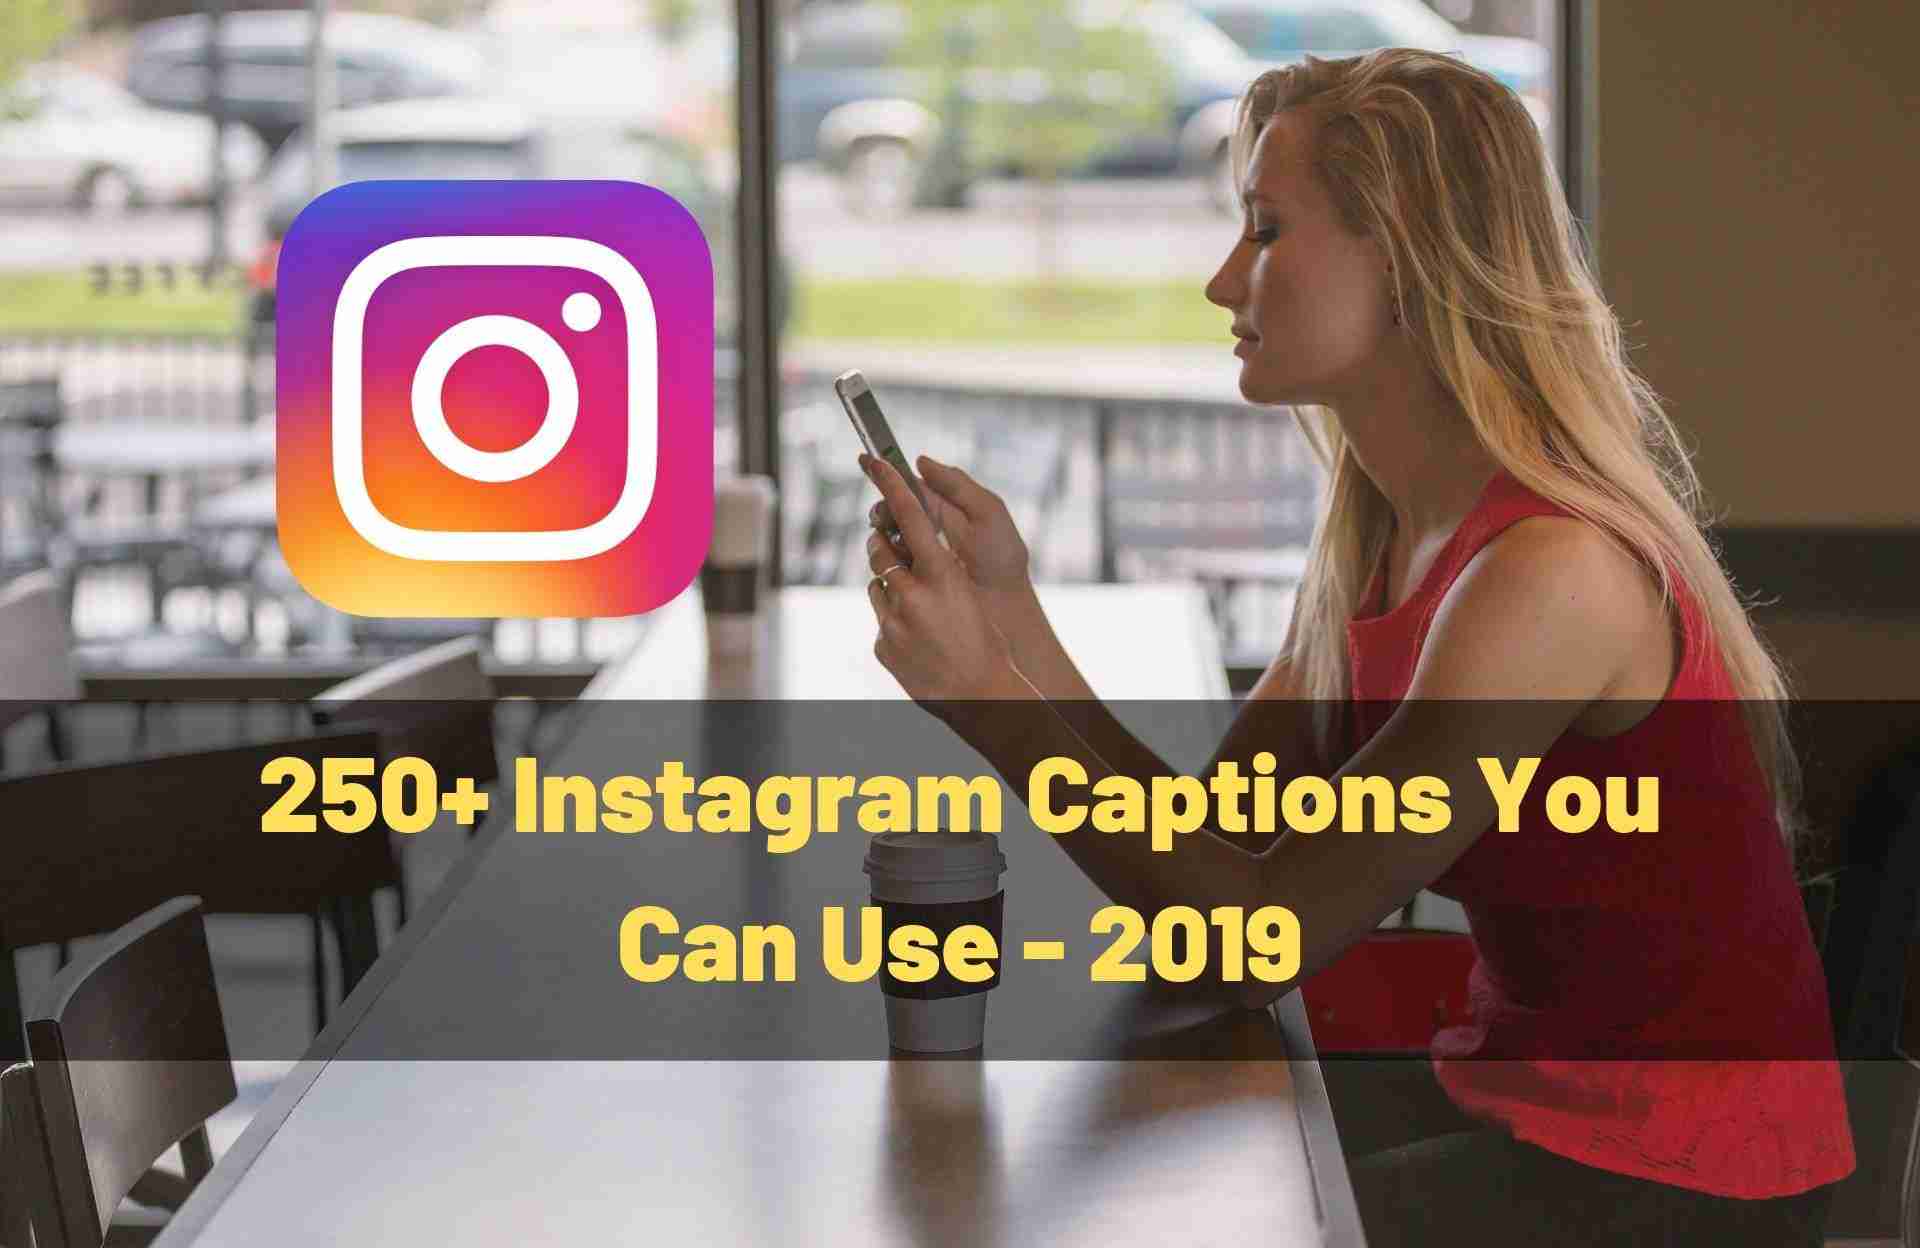 250+ Instagram Captions You Can Use - 2019